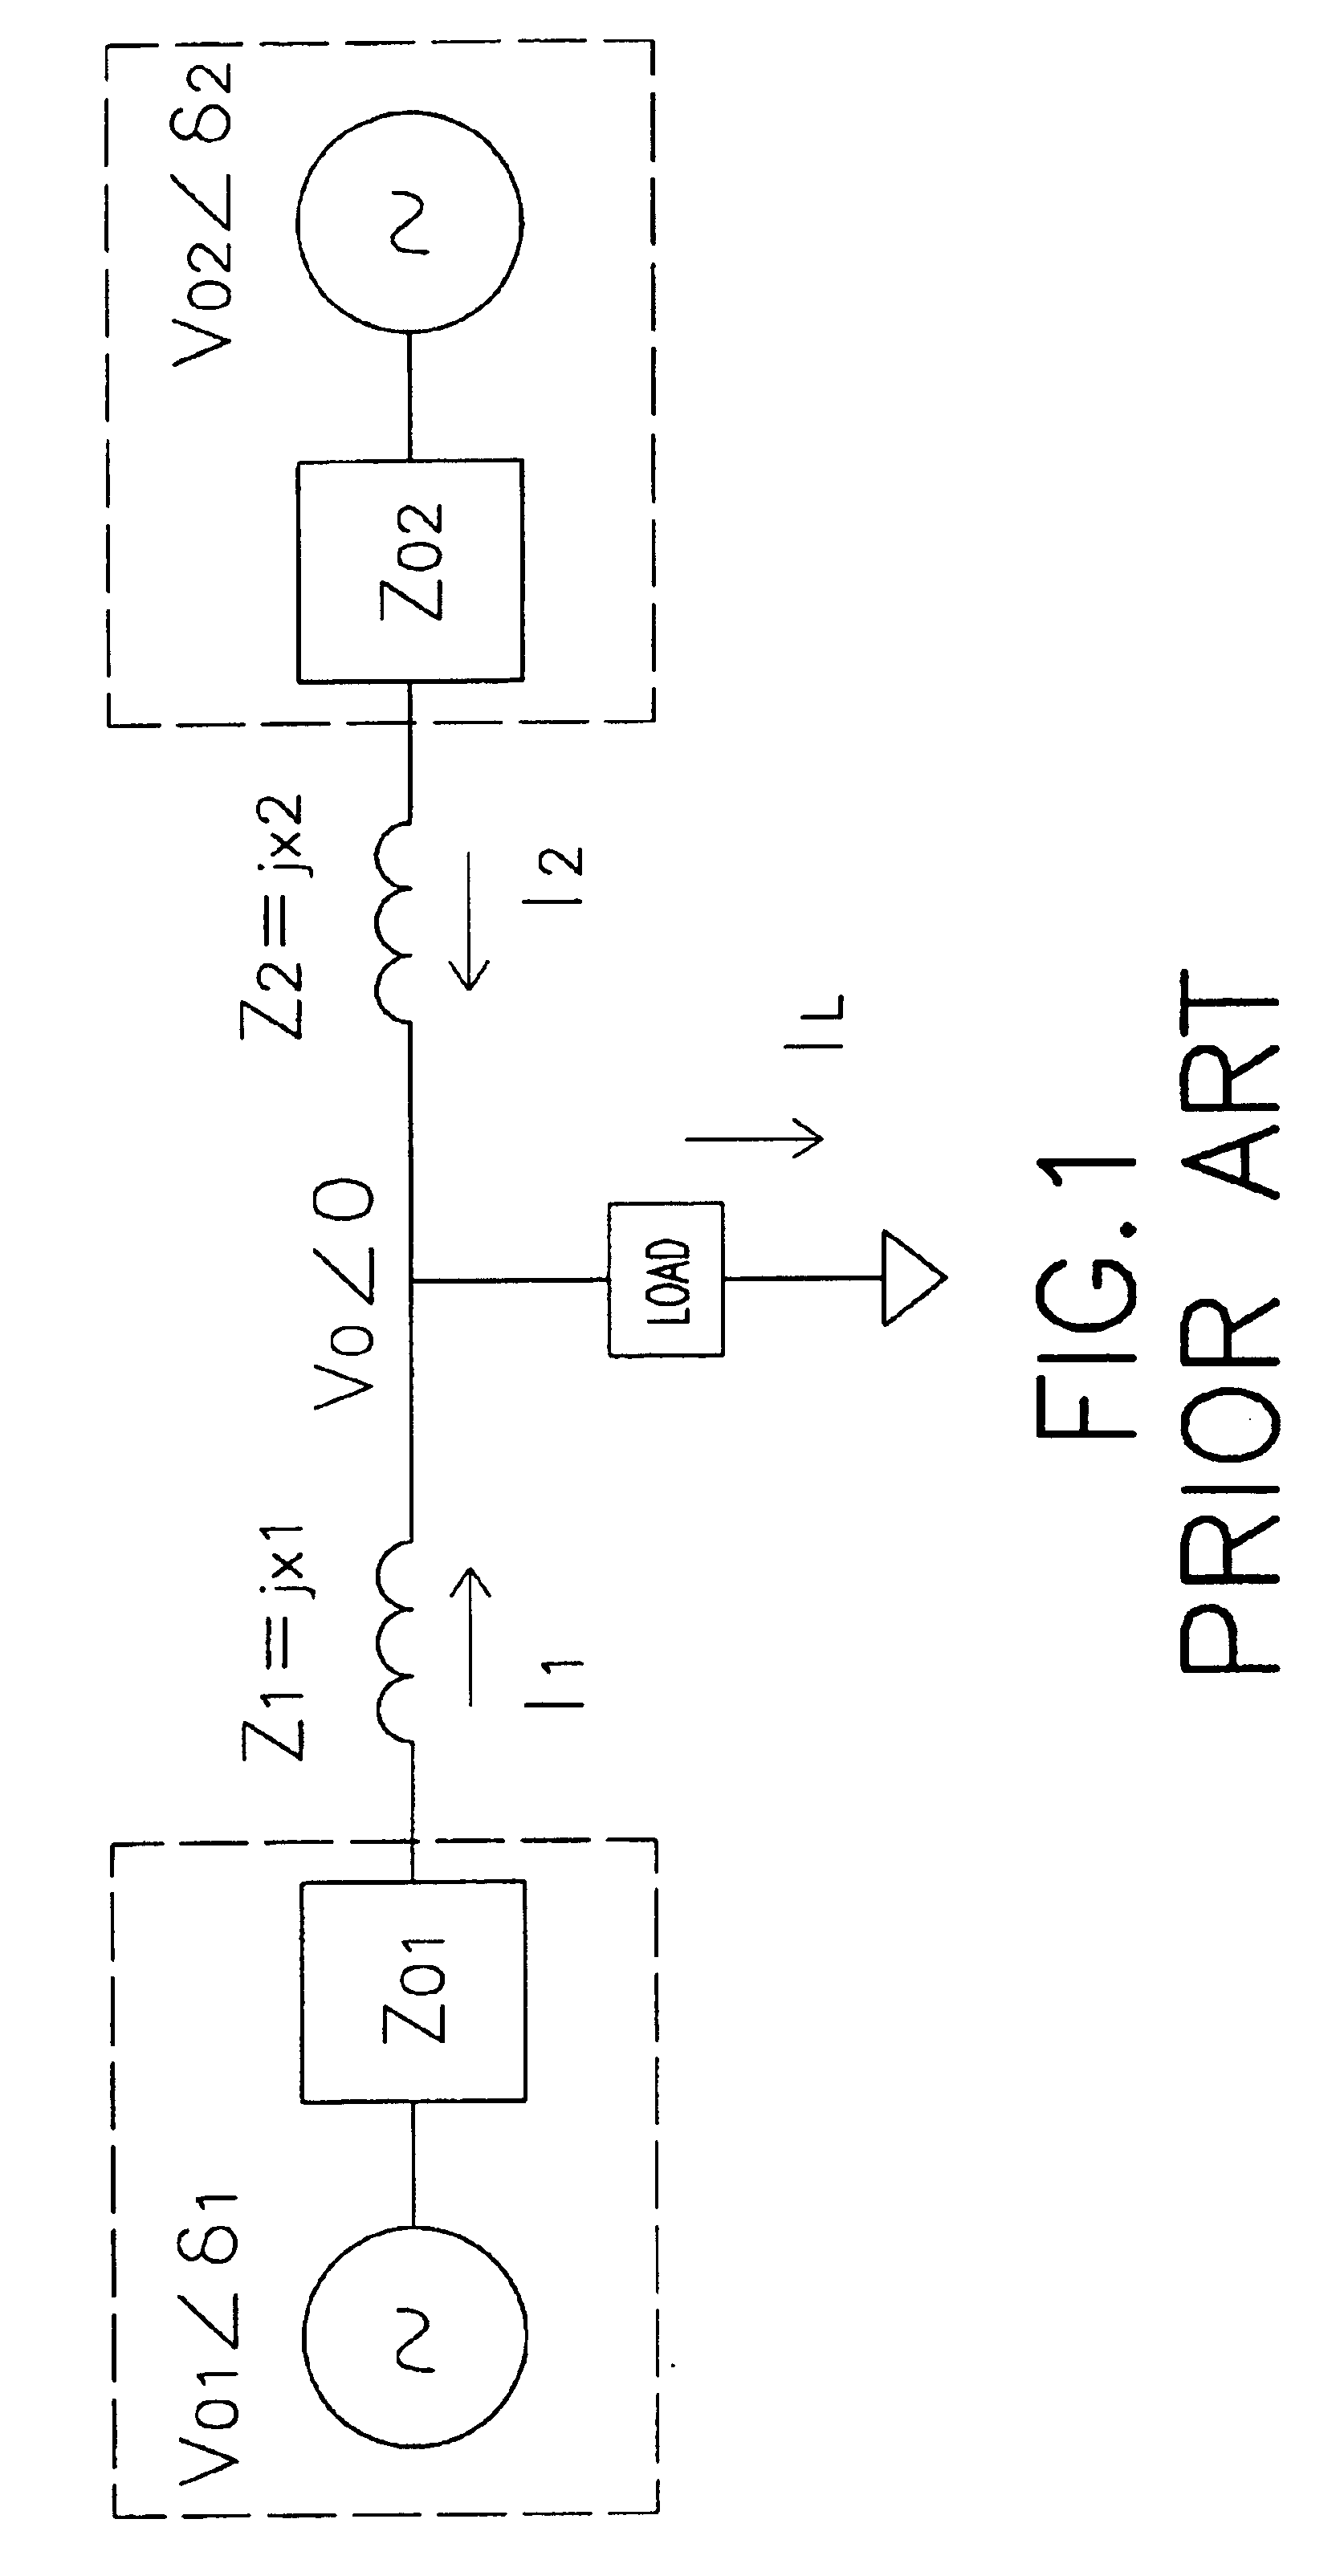 Parallel redundant power system and method for control of the power system